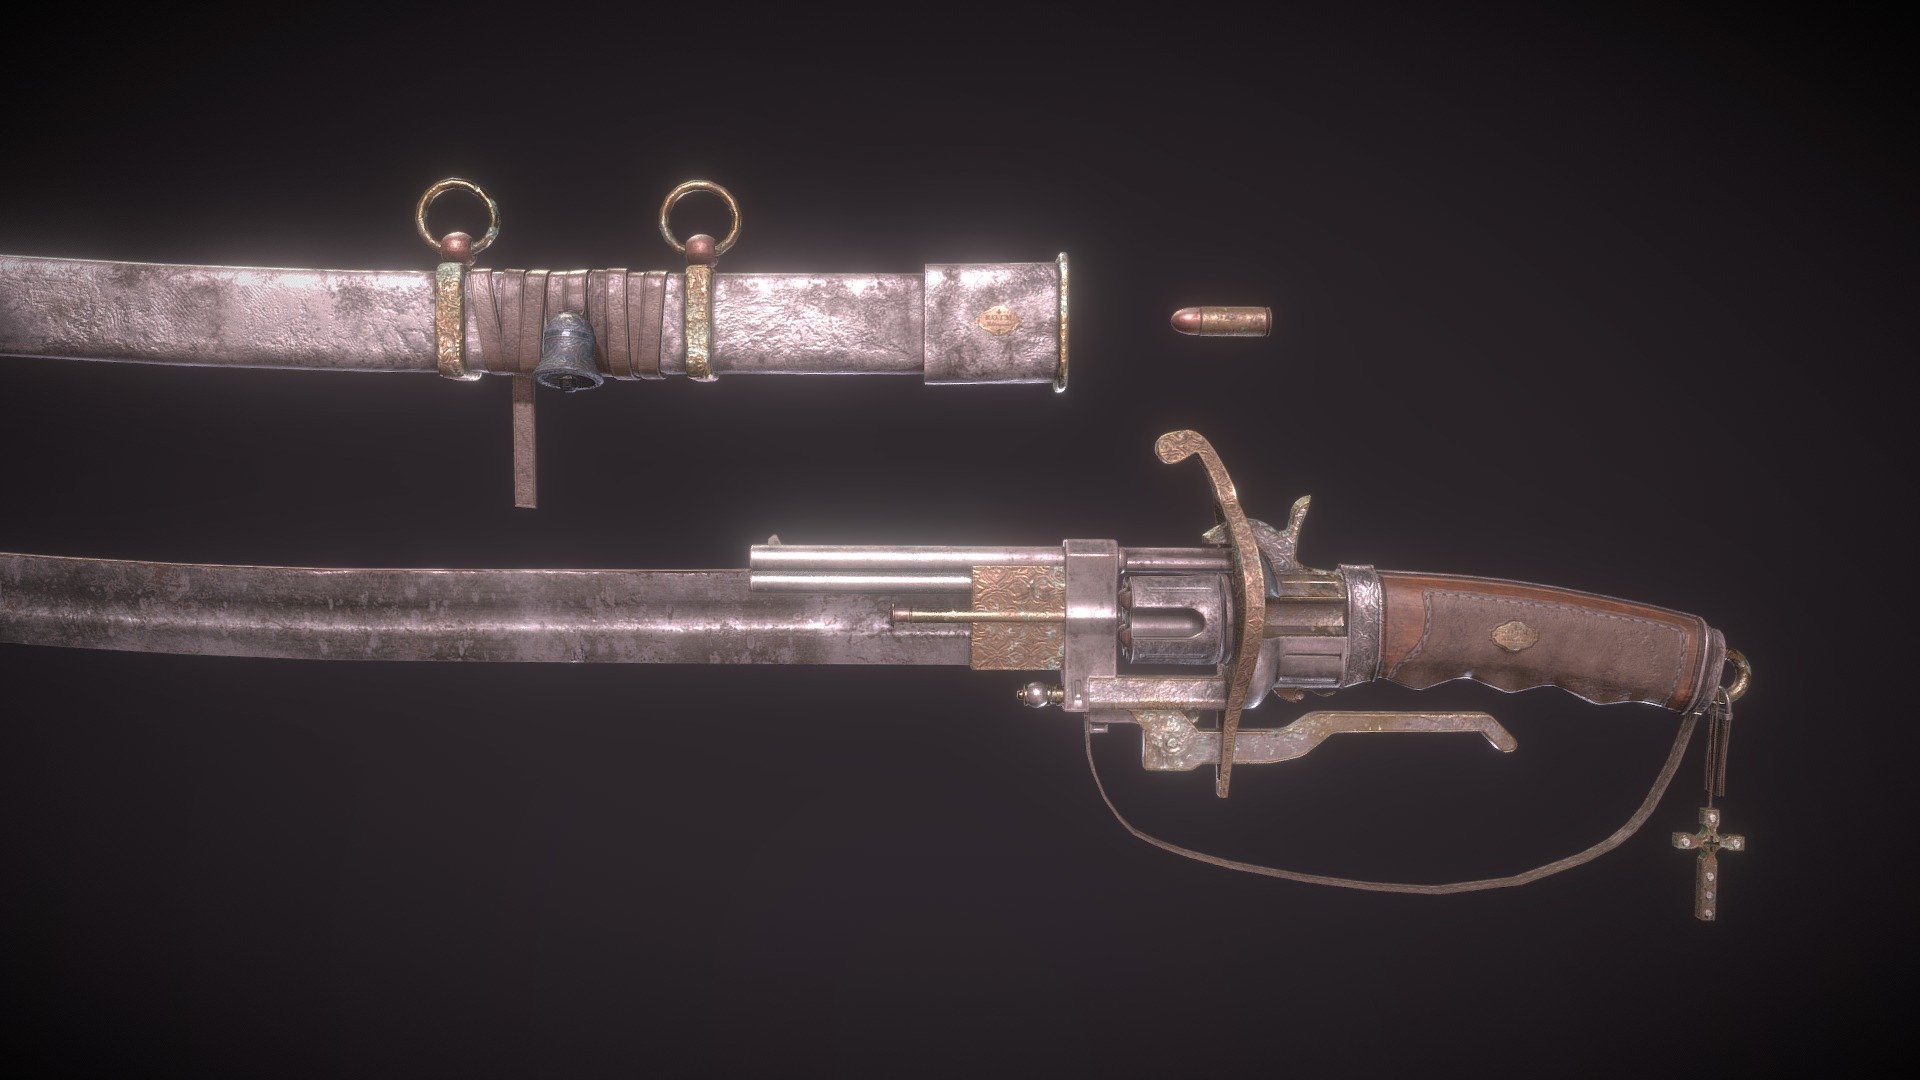 Based off 19th century military swords which combined a revolver with a sword. 

Made as a personal project, 2023.

Created using Maya and Substance Painter.

Available for download 3d model